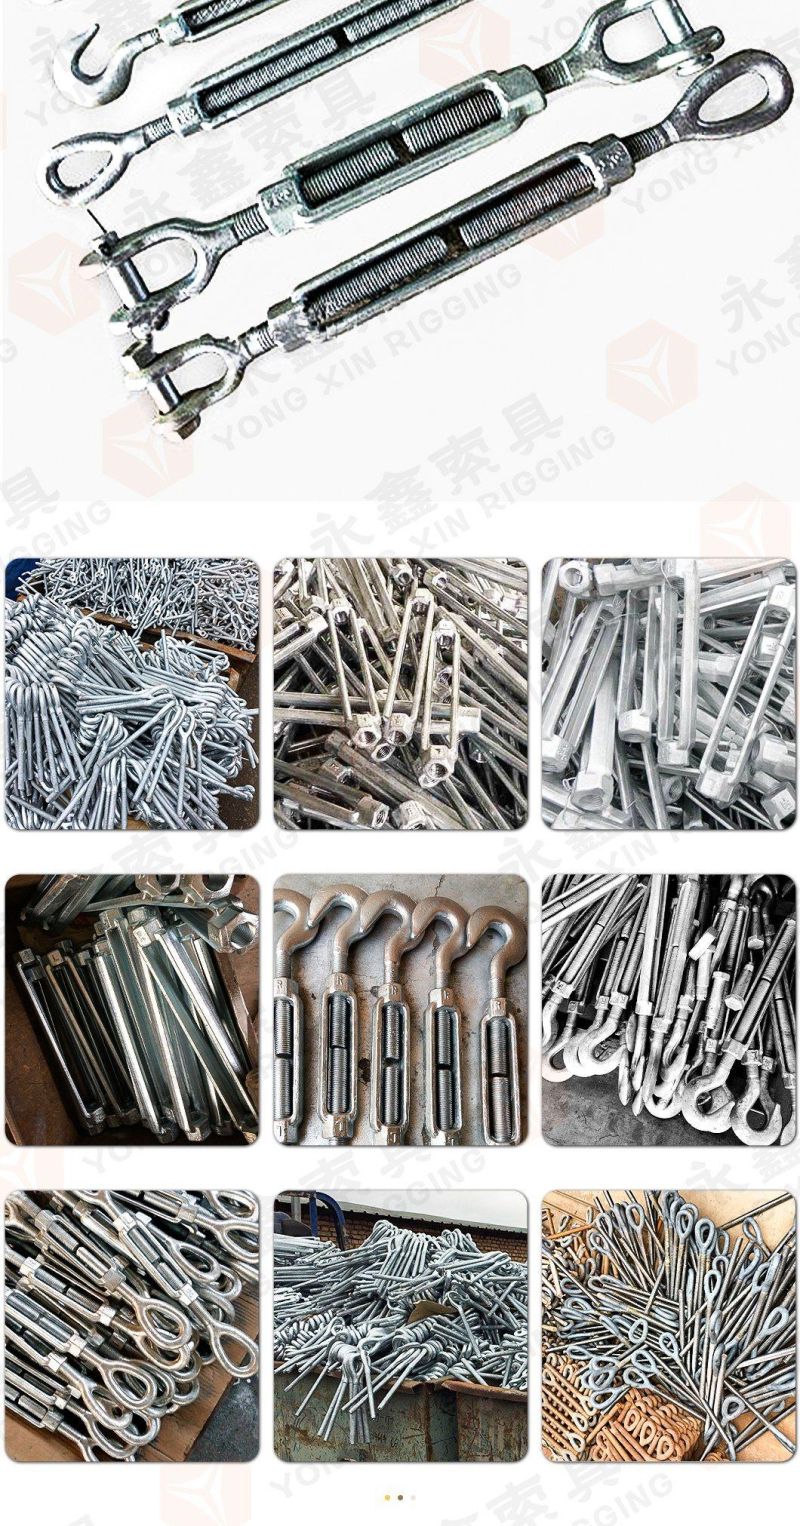 Made in China European Type Eye and Hook Drop Forged DIN 1480 Turnbuckle